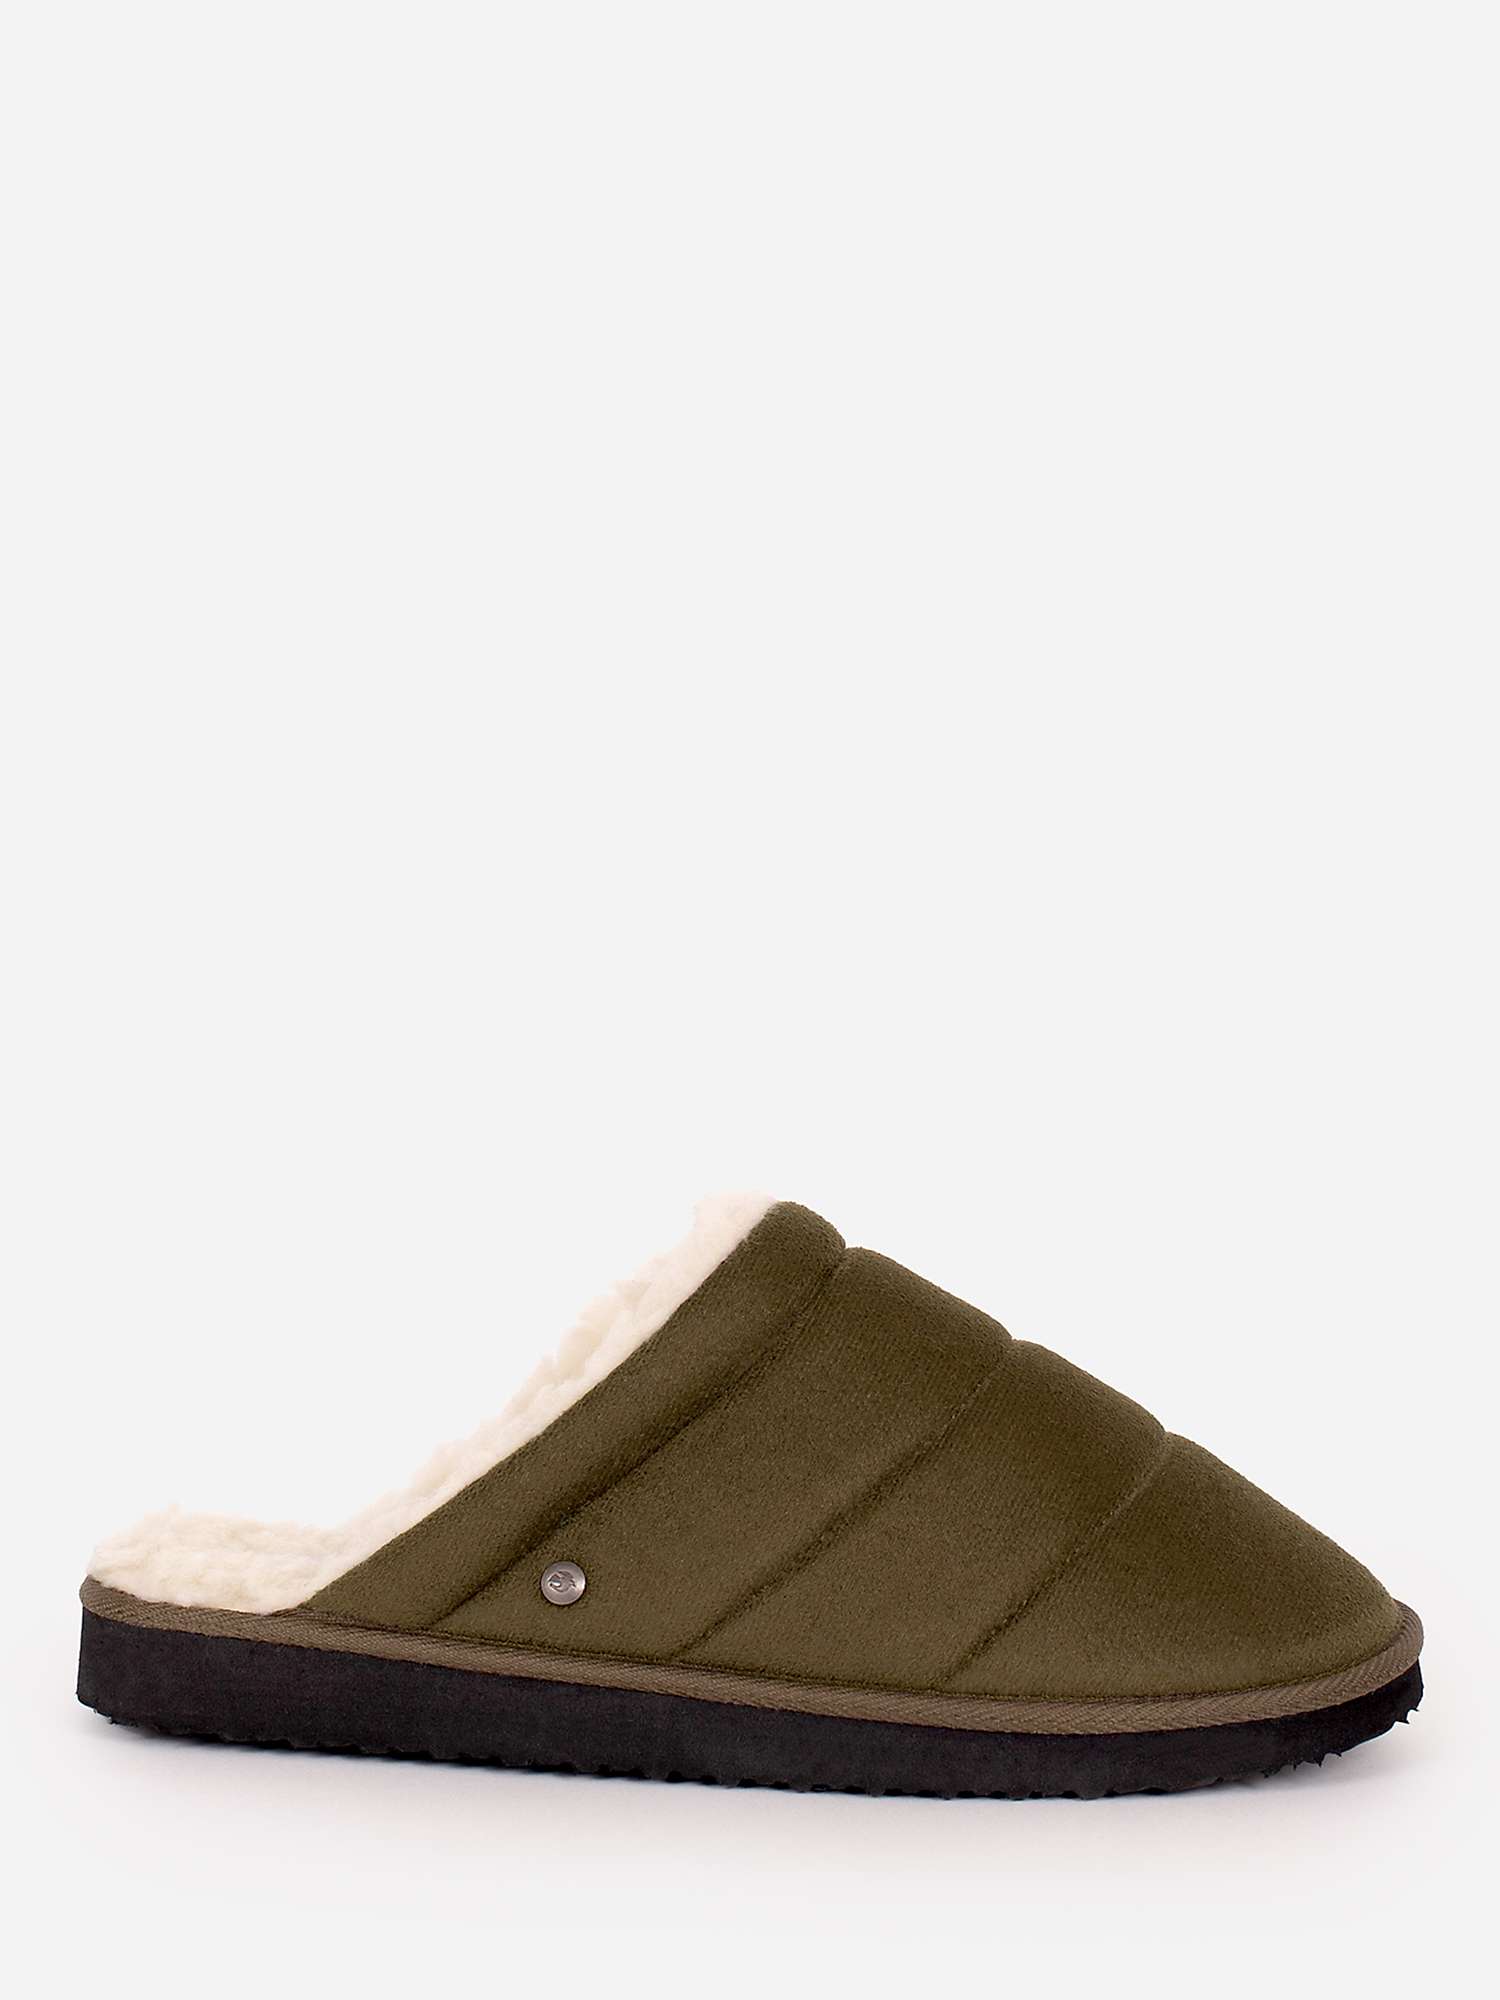 Brakeburn Quilted Backless Slippers, Green at John Lewis & Partners